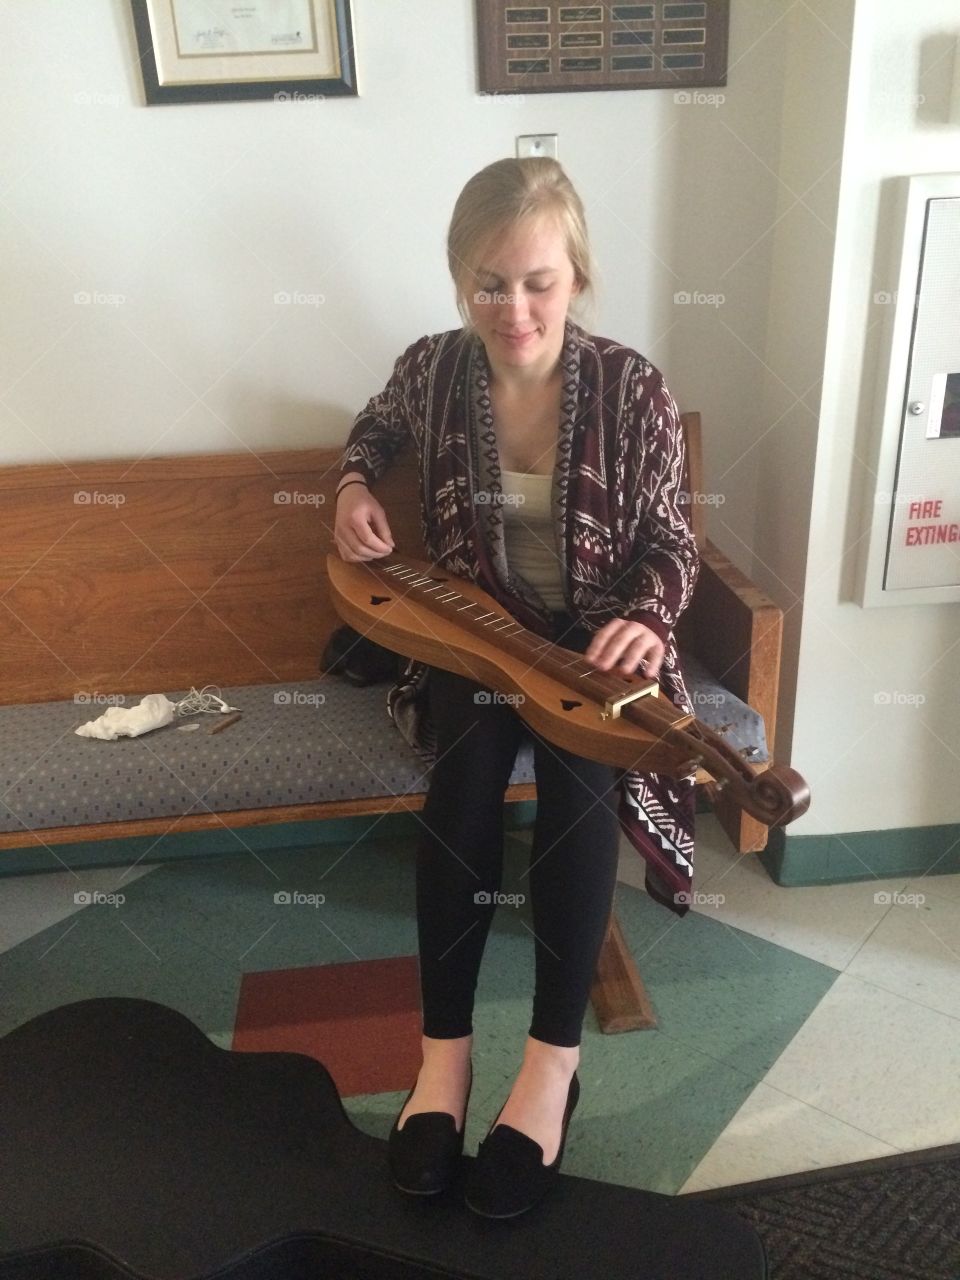 A teenage girl plays music on a beautiful antique mountain dulcimer for her onlooking friends